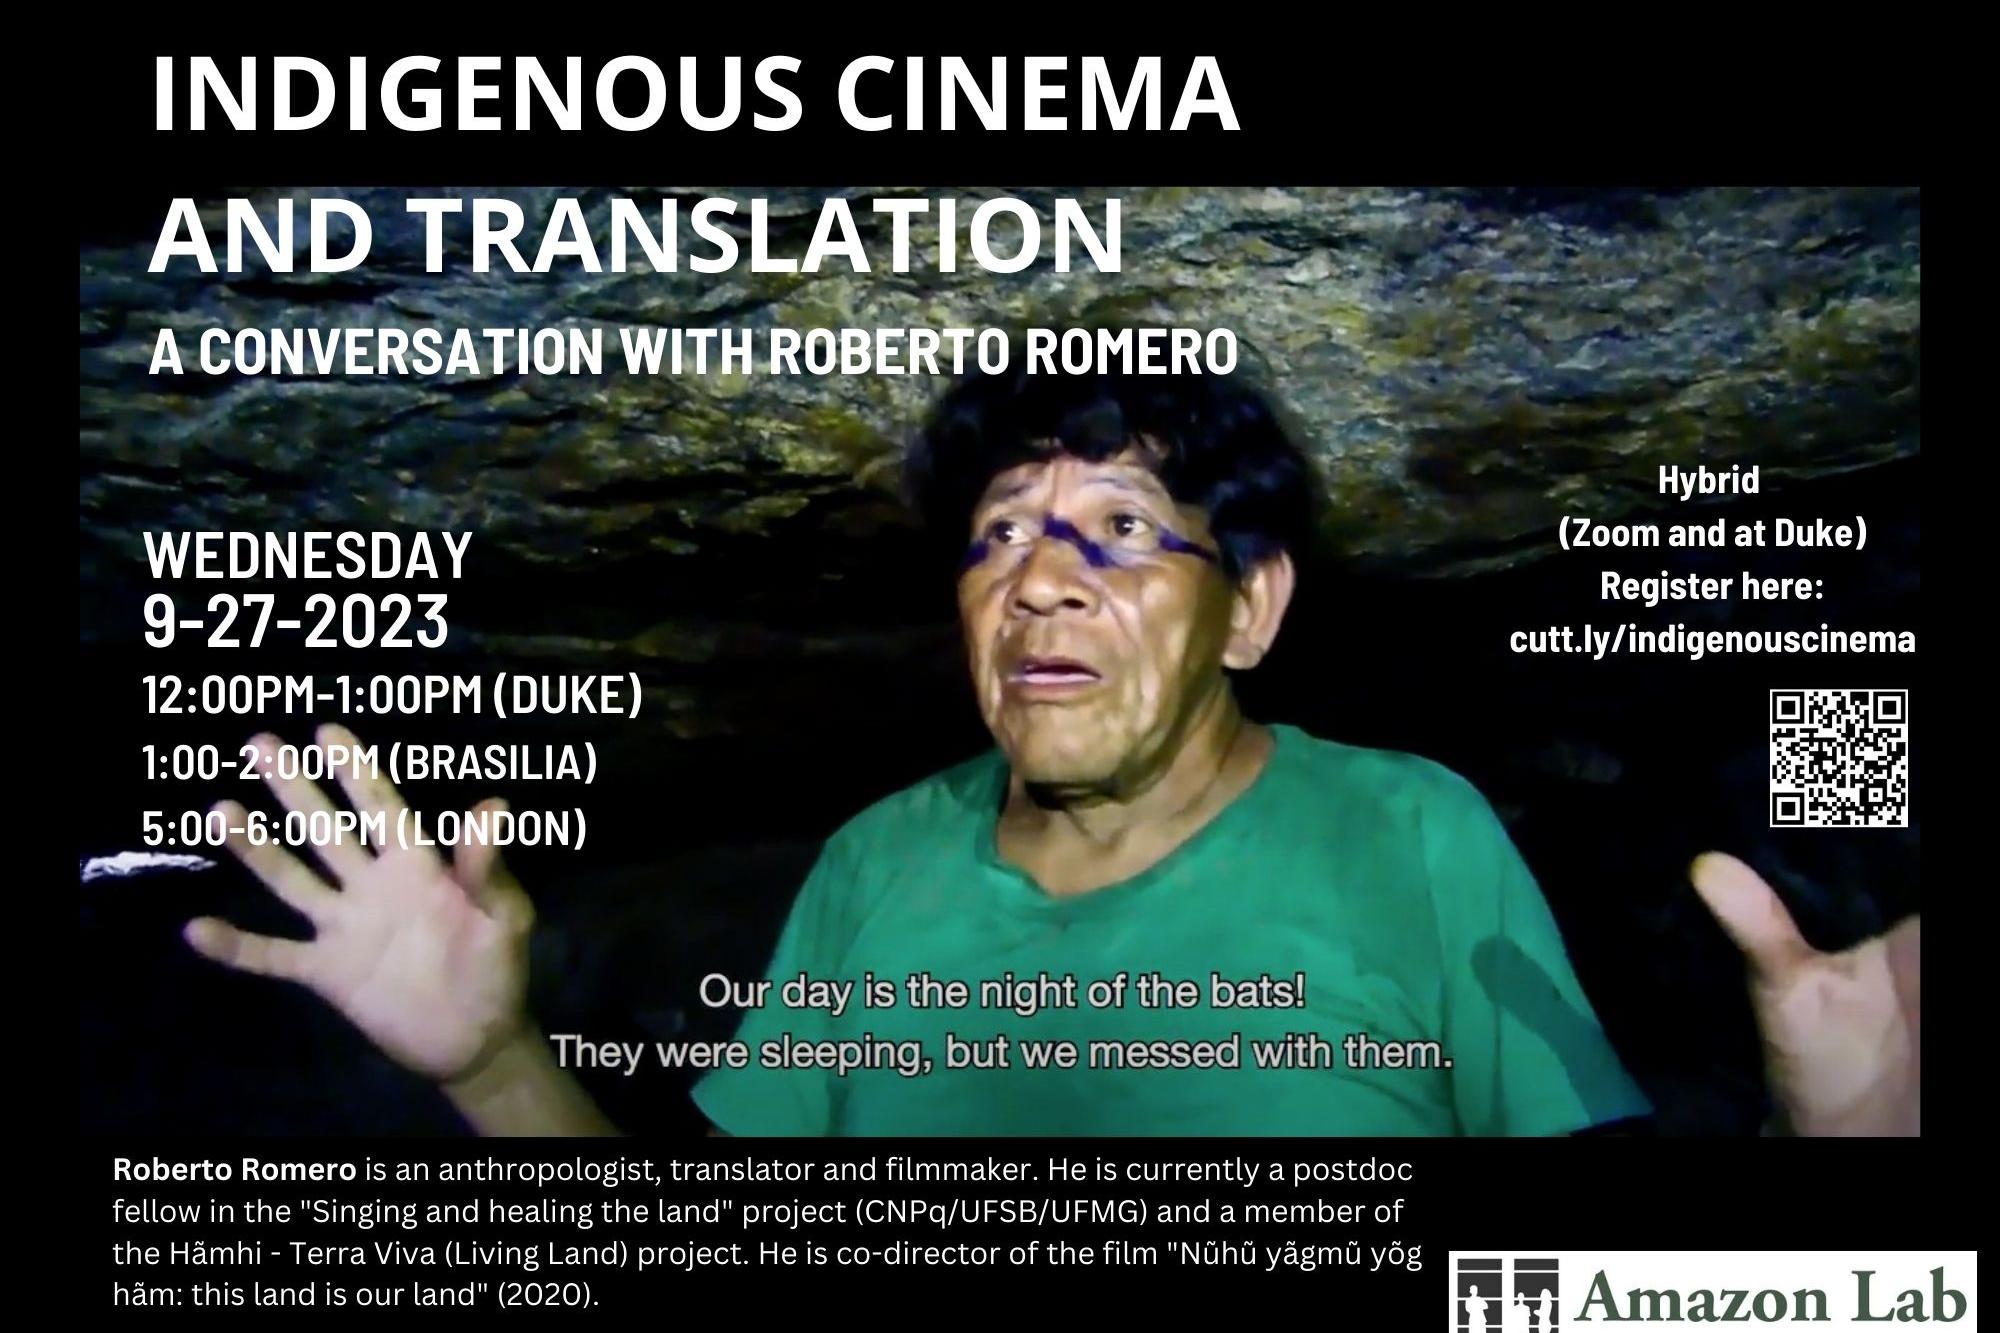 image from a film showing an indigenous Amazonian man with black hair and brown skin, holding his hands apart and up, wearing a green t-shirt, talking, with the caption &amp;amp;amp;quot;Our day is the night of the bats! They were sleeping, but we messed with them.&amp;amp;amp;quot; - Event text overlaid on top of the photo.